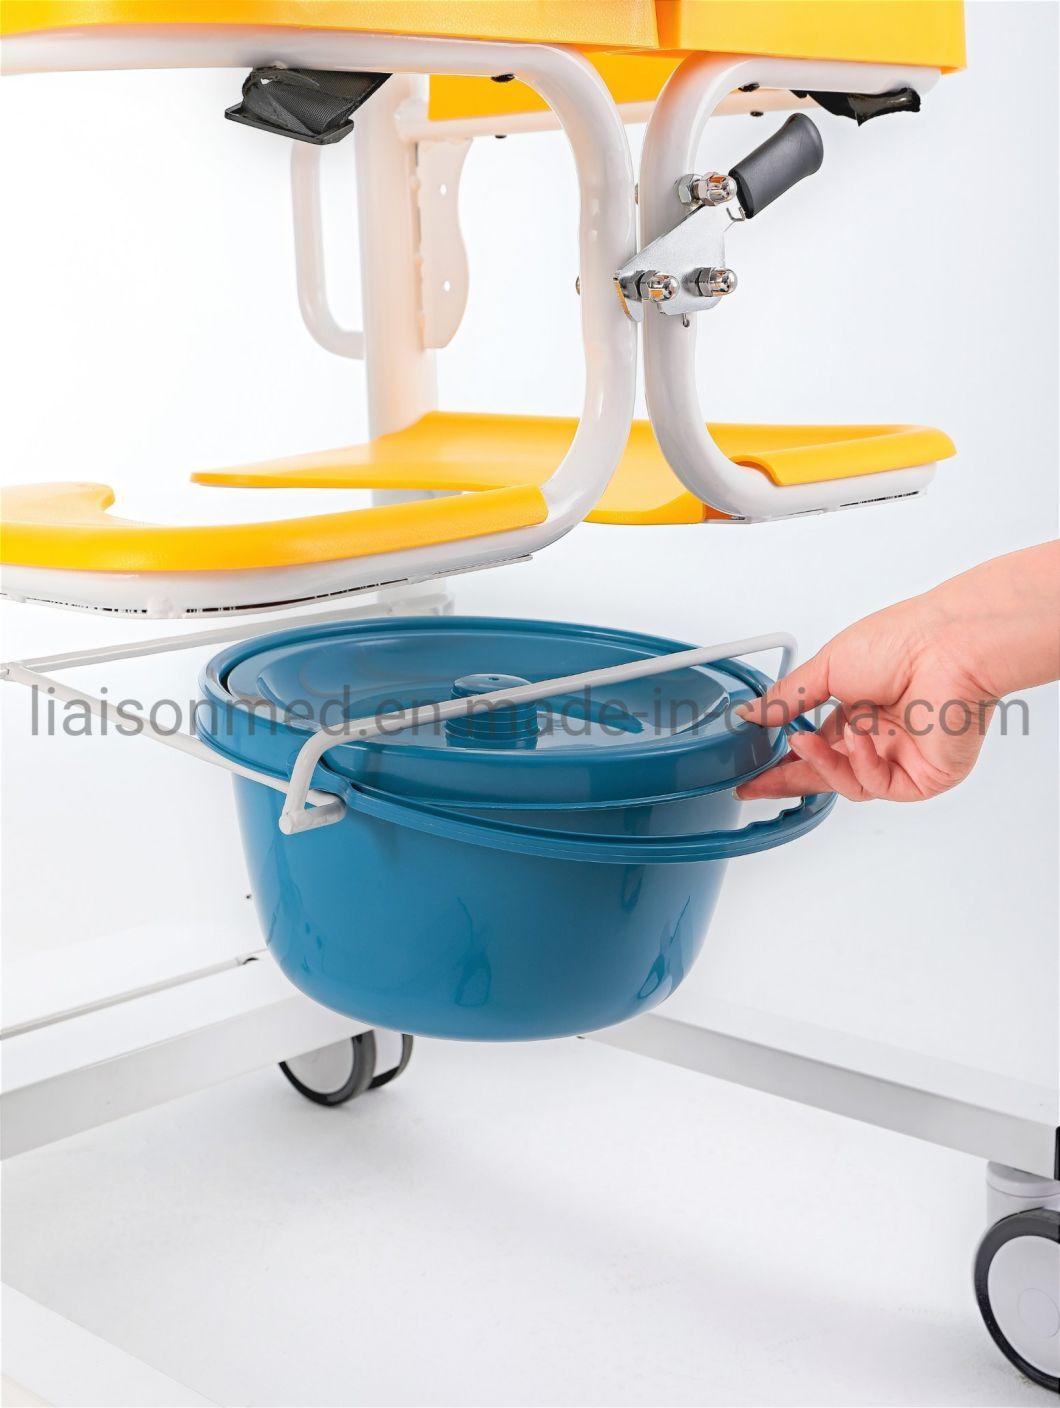 Mn-Ywj 001 Moving CE&ISO Lifting Transfer Chair for The Elderly